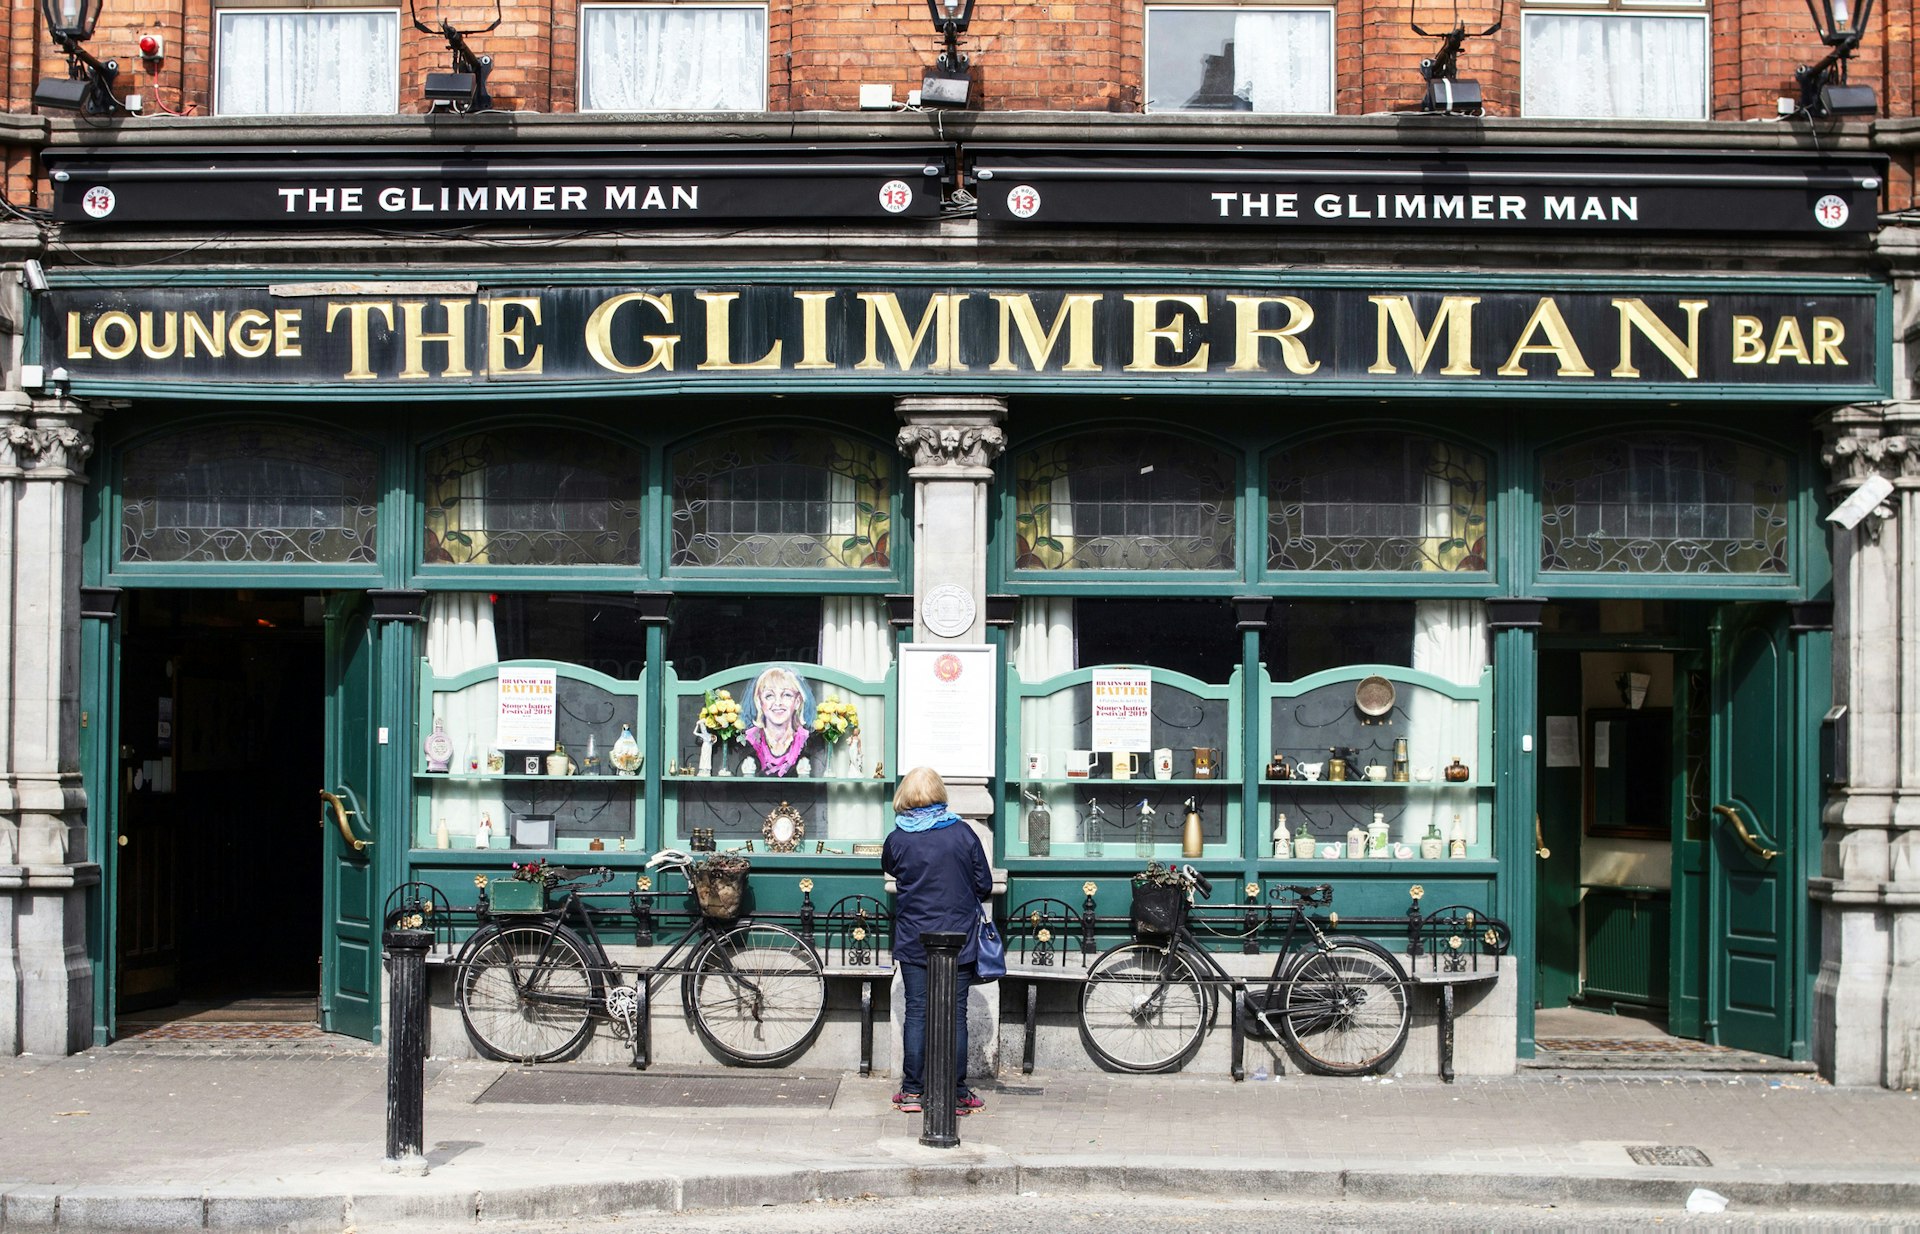 A woman stands facing the facade of an old pub called The Glimmer Man